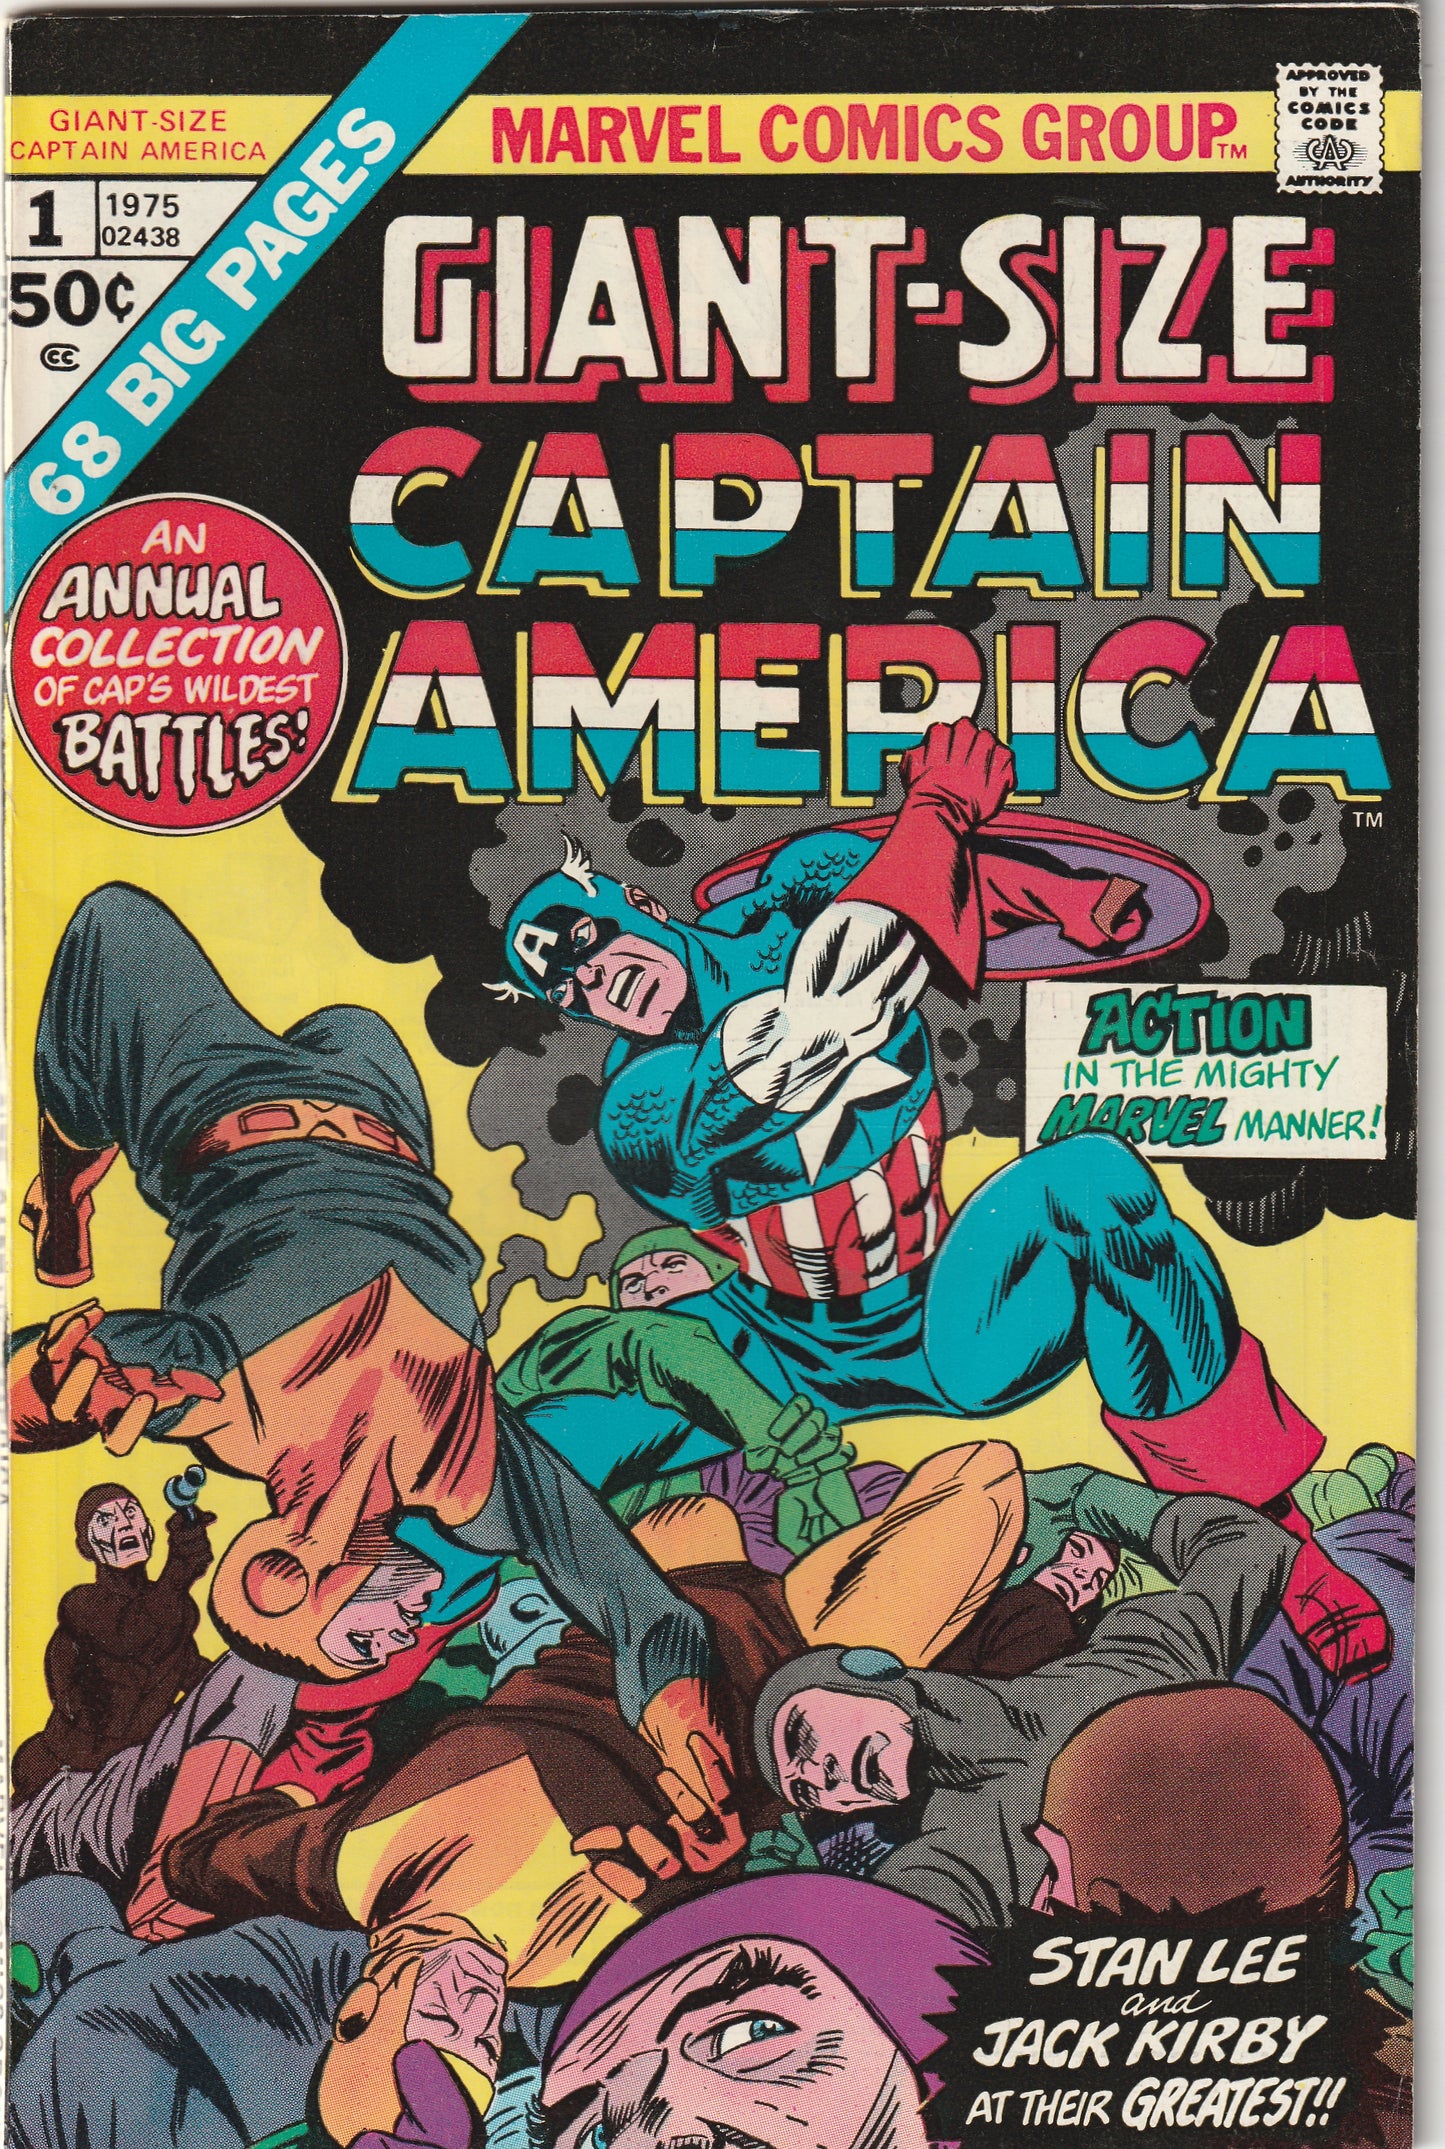 Giant-Size Captain America #1 (1975) - Reprints Tales of Suspense 59-63 by Kirby